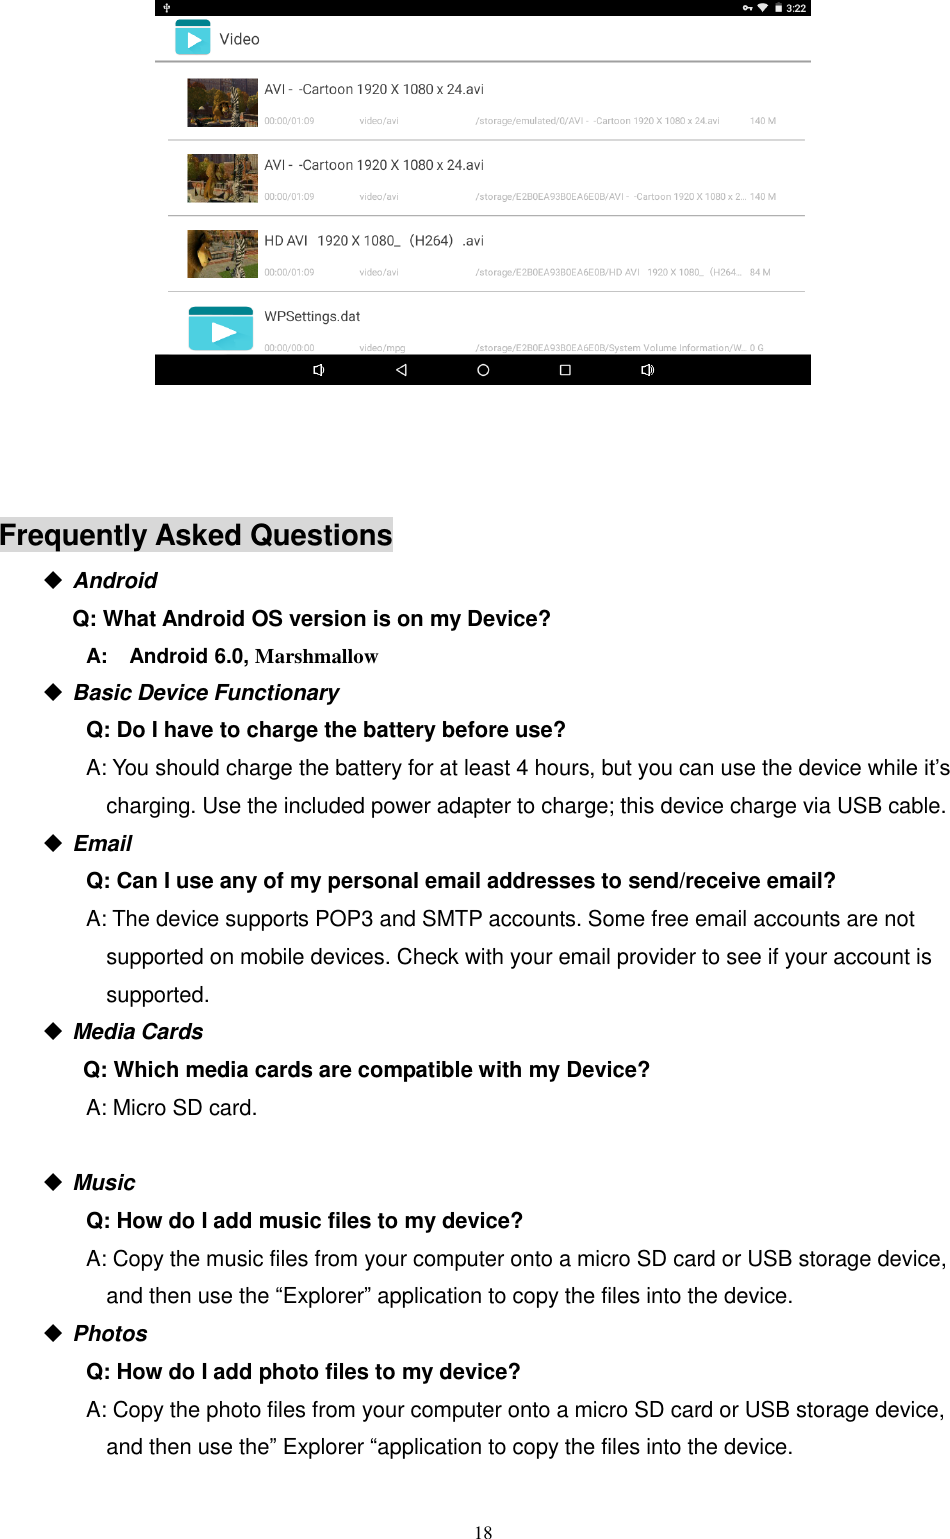  18       Frequently Asked Questions                                                 Android   Q: What Android OS version is on my Device?         A:    Android 6.0, Marshmallow    Basic Device Functionary Q: Do I have to charge the battery before use? A: You should charge the battery for at least 4 hours, but you can use the device while it’s charging. Use the included power adapter to charge; this device charge via USB cable.  Email Q: Can I use any of my personal email addresses to send/receive email? A: The device supports POP3 and SMTP accounts. Some free email accounts are not supported on mobile devices. Check with your email provider to see if your account is supported.  Media Cards       Q: Which media cards are compatible with my Device? A: Micro SD card.   Music Q: How do I add music files to my device? A: Copy the music files from your computer onto a micro SD card or USB storage device, and then use the “Explorer” application to copy the files into the device.  Photos Q: How do I add photo files to my device? A: Copy the photo files from your computer onto a micro SD card or USB storage device, and then use the” Explorer “application to copy the files into the device. 